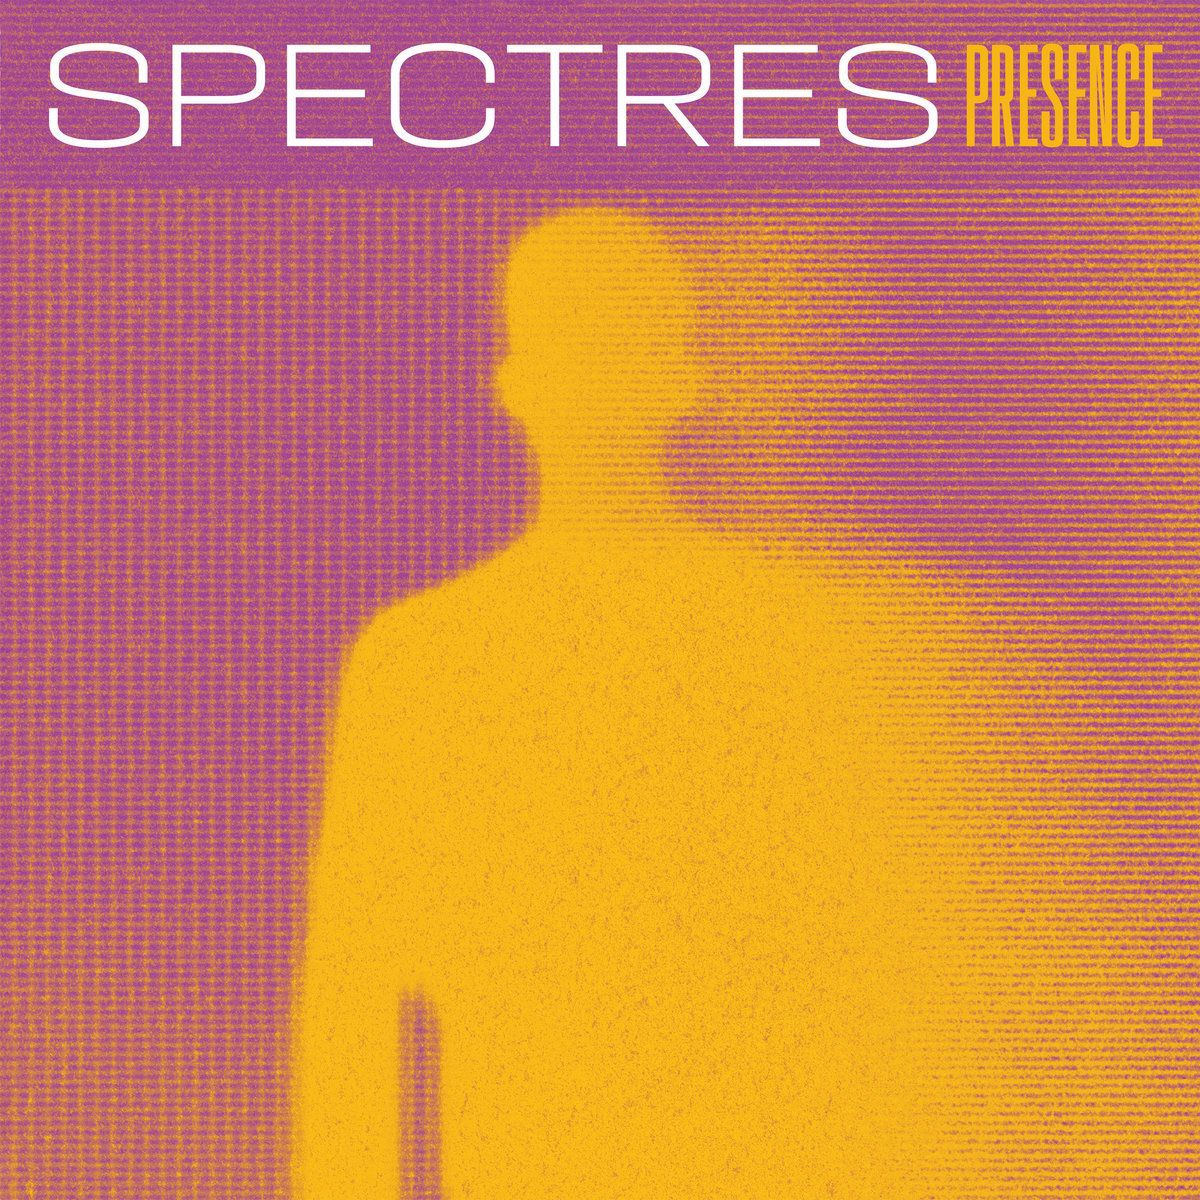 Vancouver Post-Punk Heroes Spectres Debut New Single “Chain Reaction”